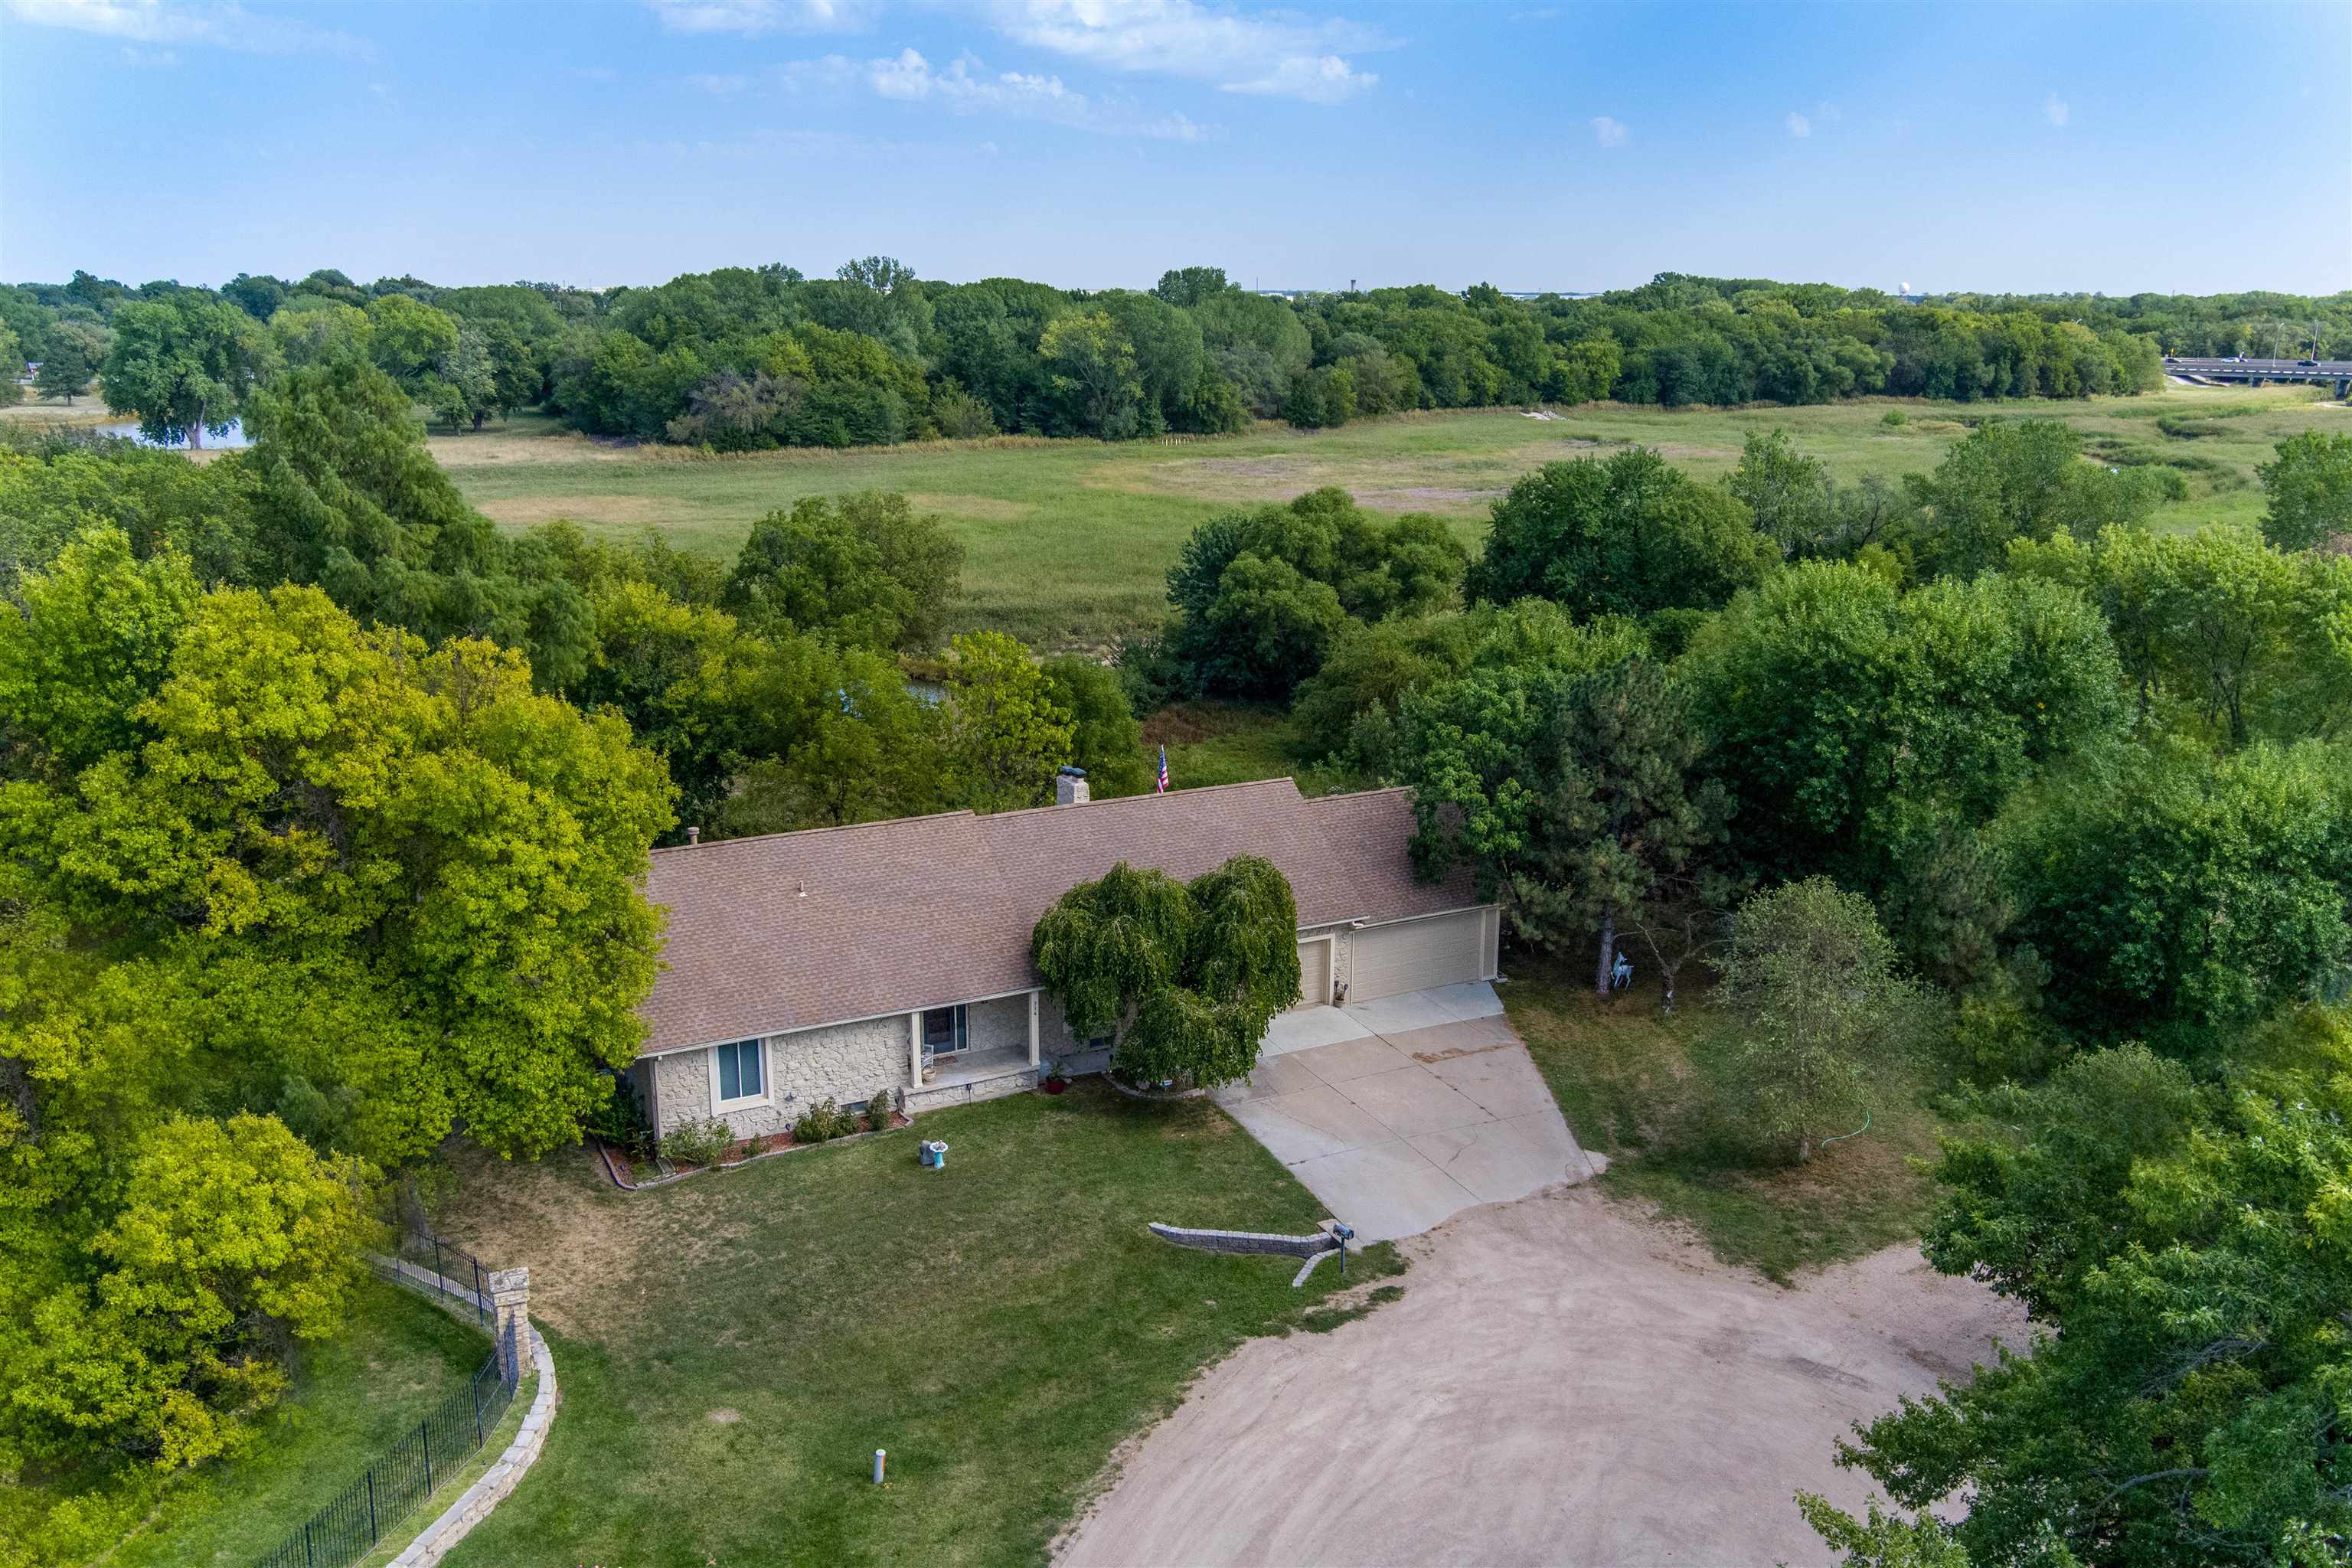 Country living in the city limits, located in West Wichita, Eisenhower School District!  This unique